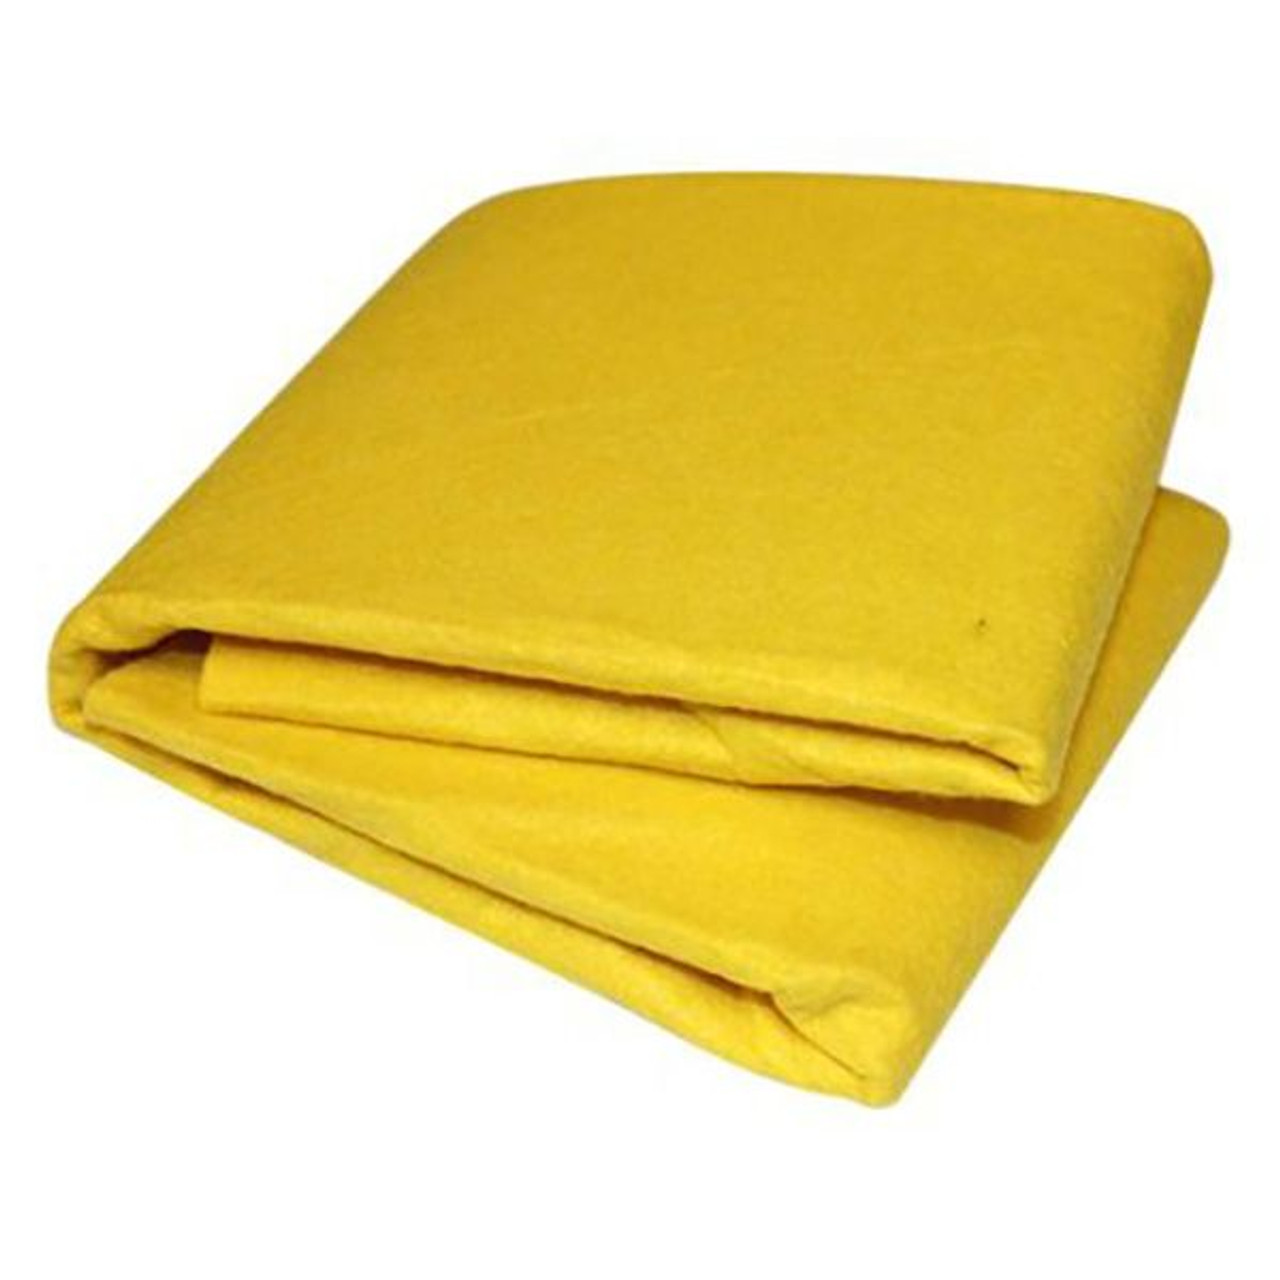 https://cdn11.bigcommerce.com/s-tumf4kk1l4/images/stencil/1280x1280/products/3131/5756/20-x-24-camp-towel-yellow-non-woven-super-absorbent-material-25__50287.1640714987.jpg?c=1?imbypass=on